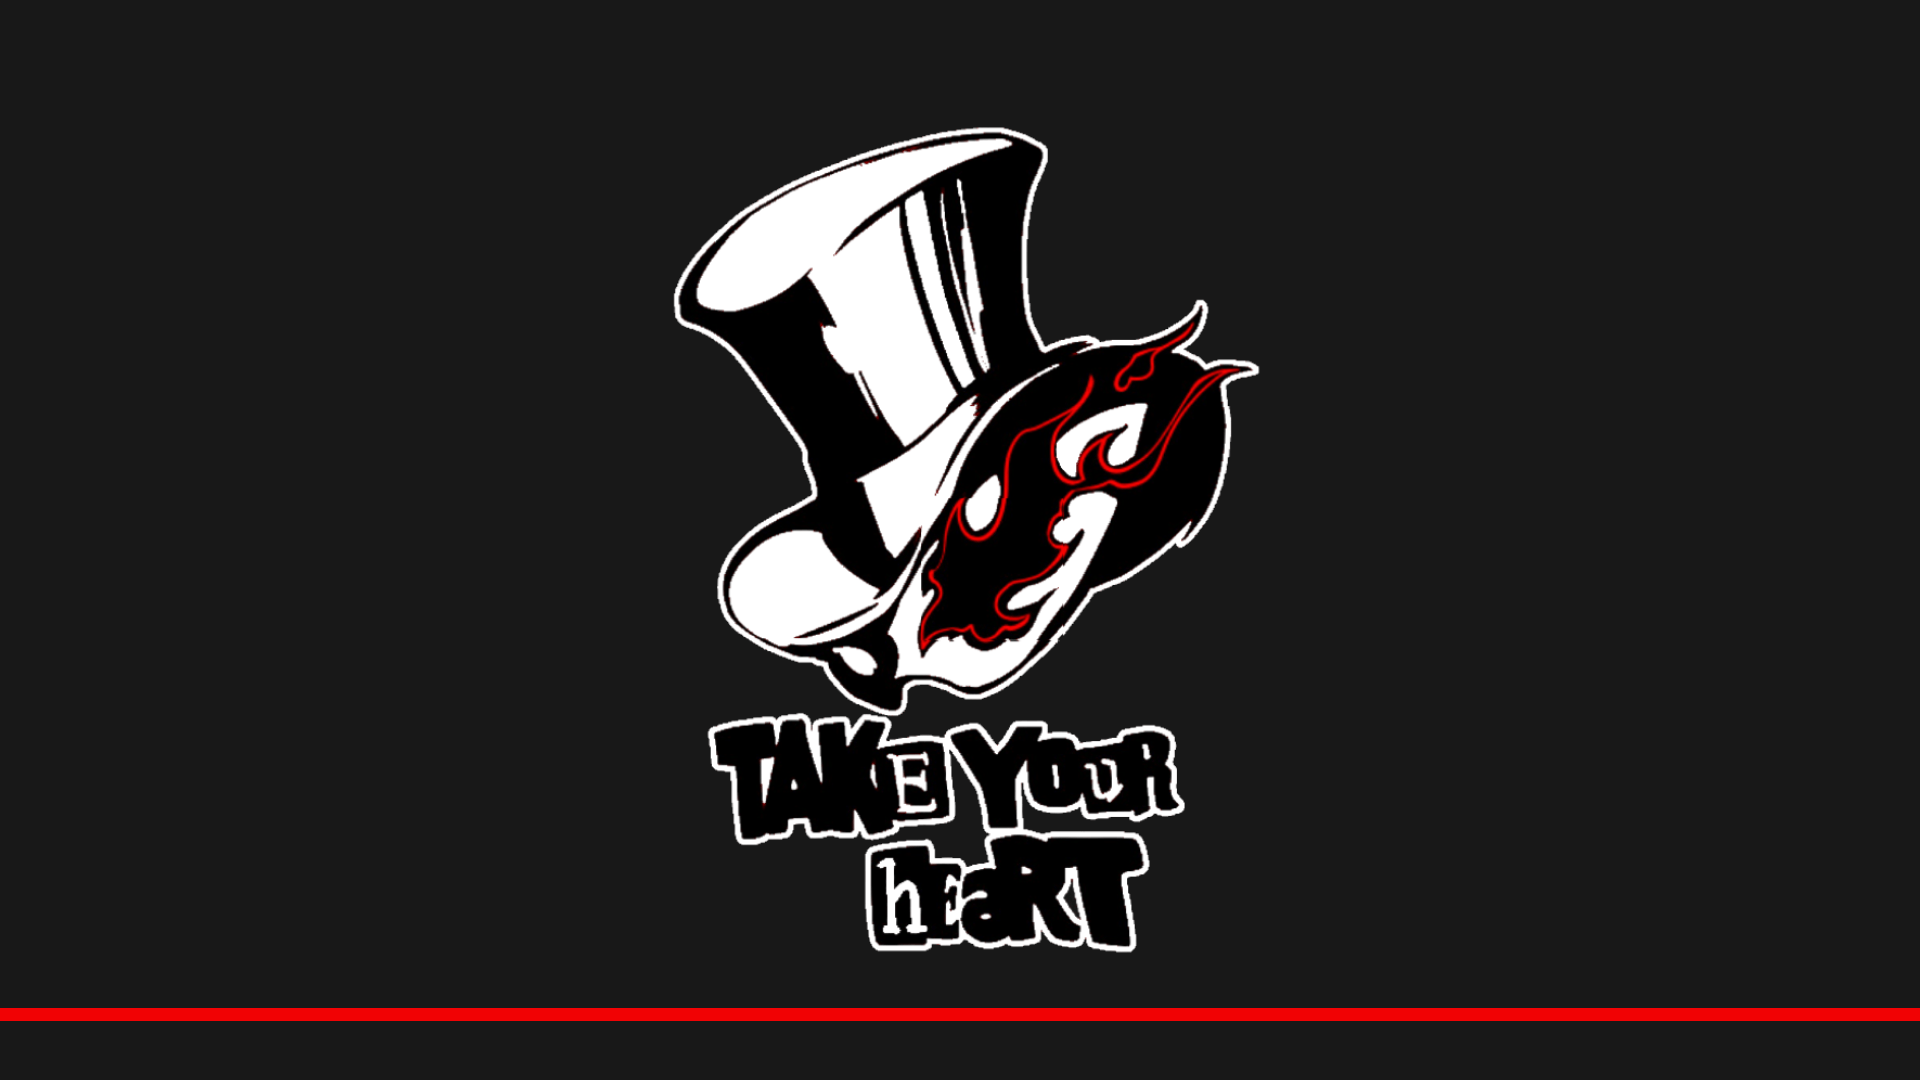 Persona 5 Your Heart PC Wallpaper 2